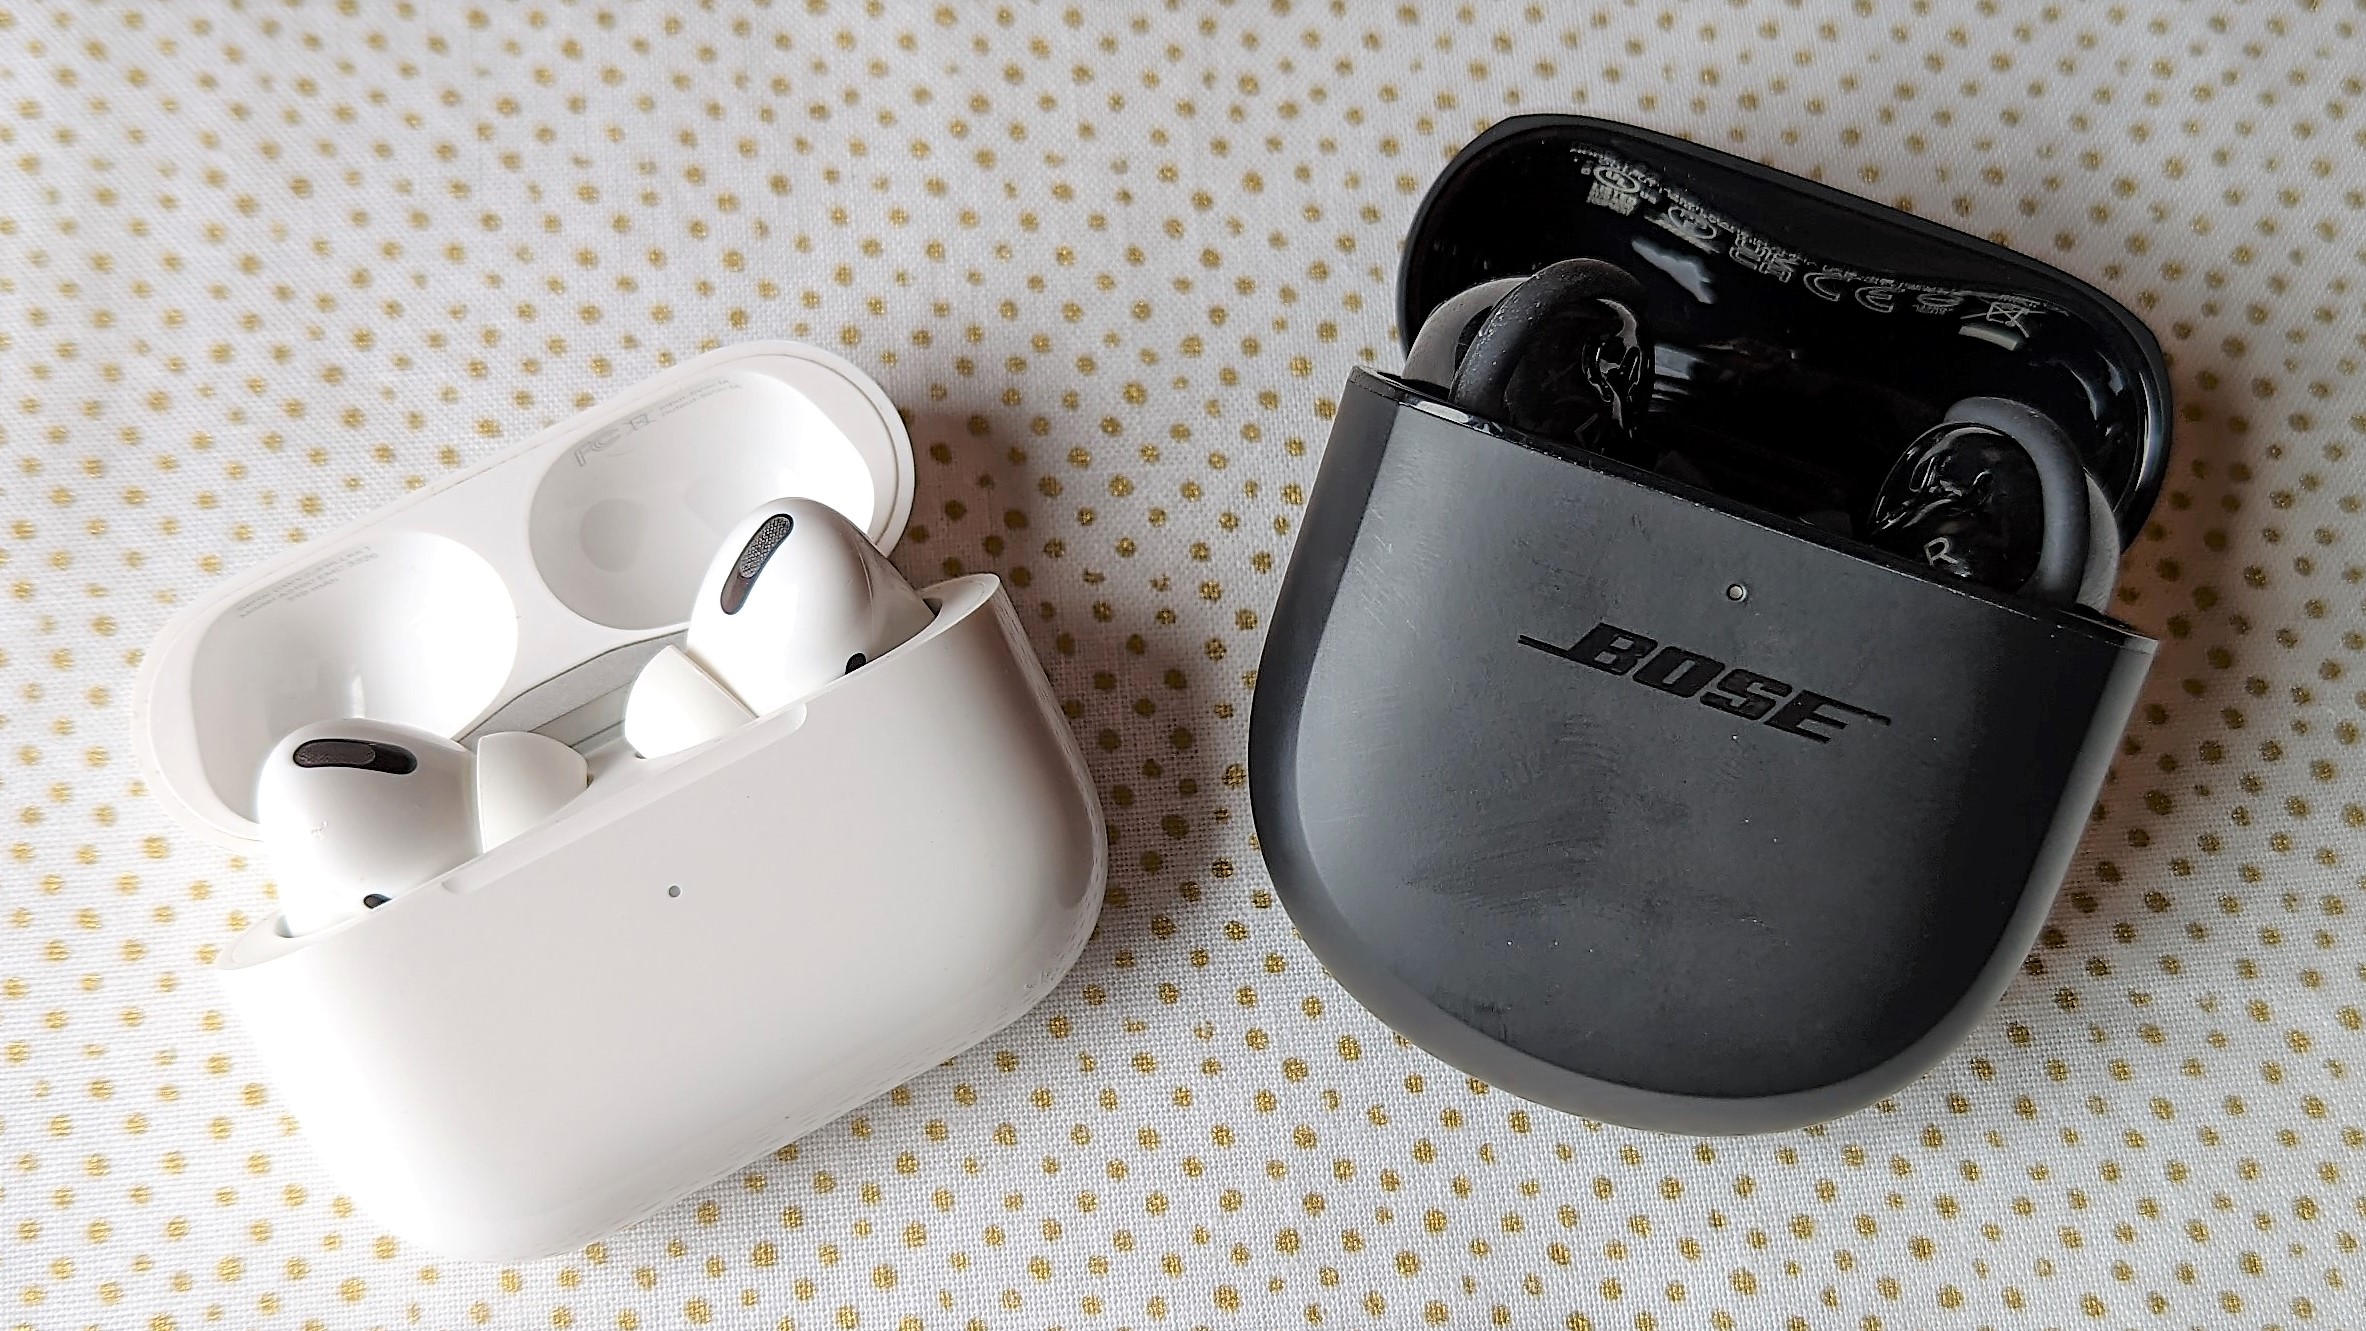 Apple AirPods Pro 2 and Bose QuietComfort Earbuds 2 side-by-side